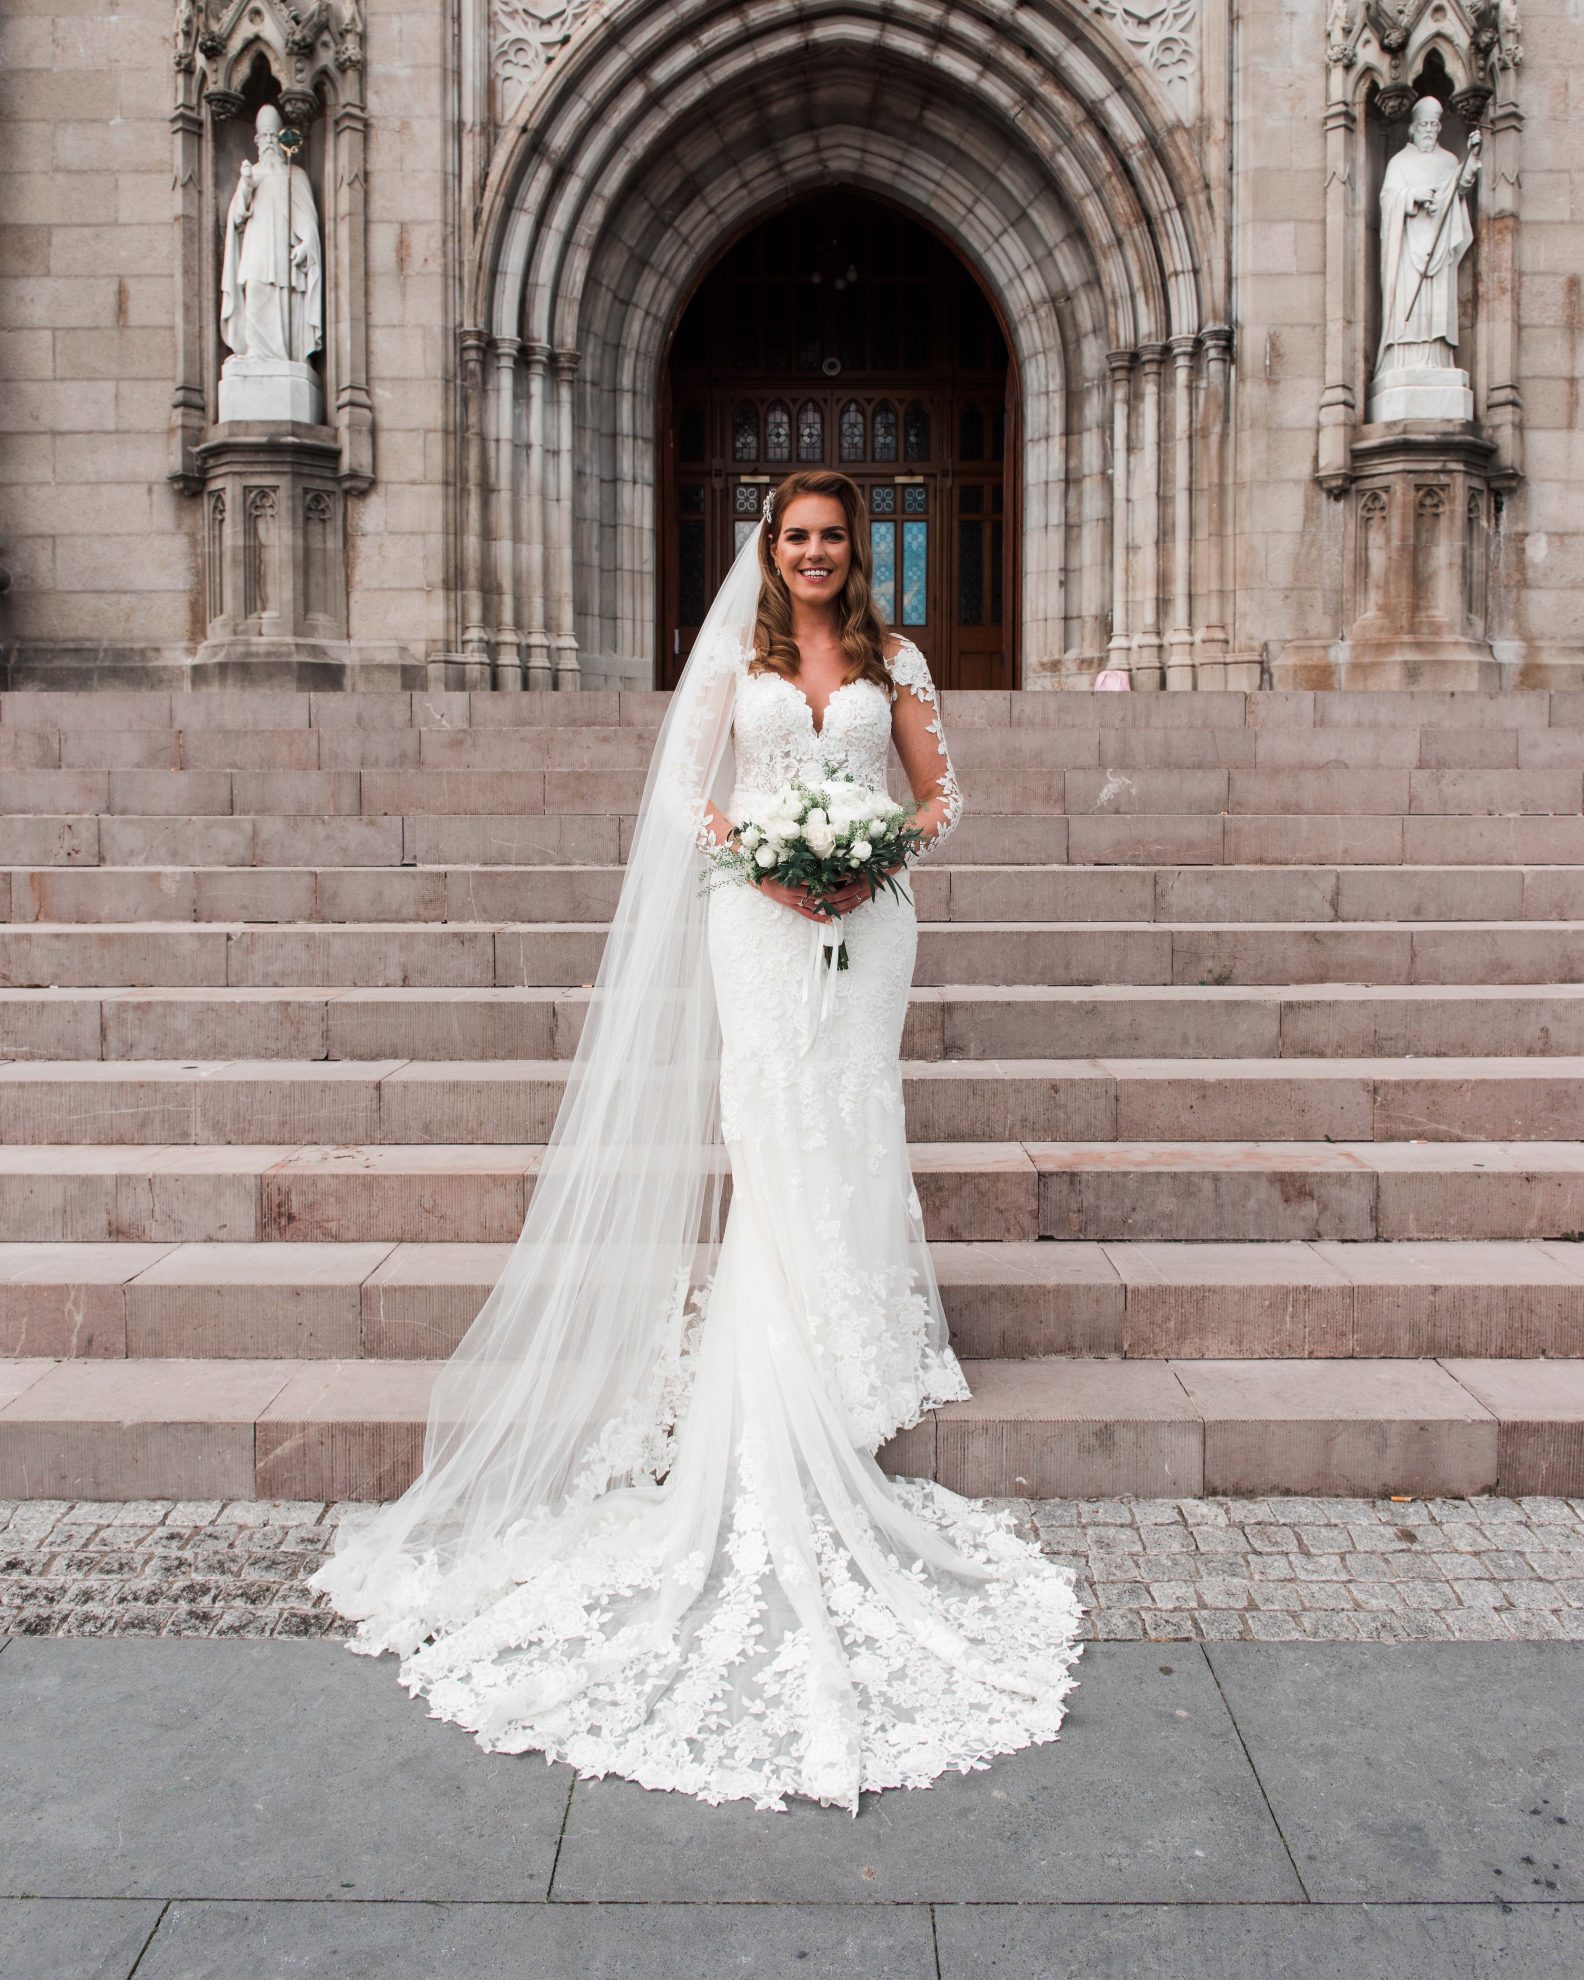 Seidy in her wedding dress on the step so fthe cathedral